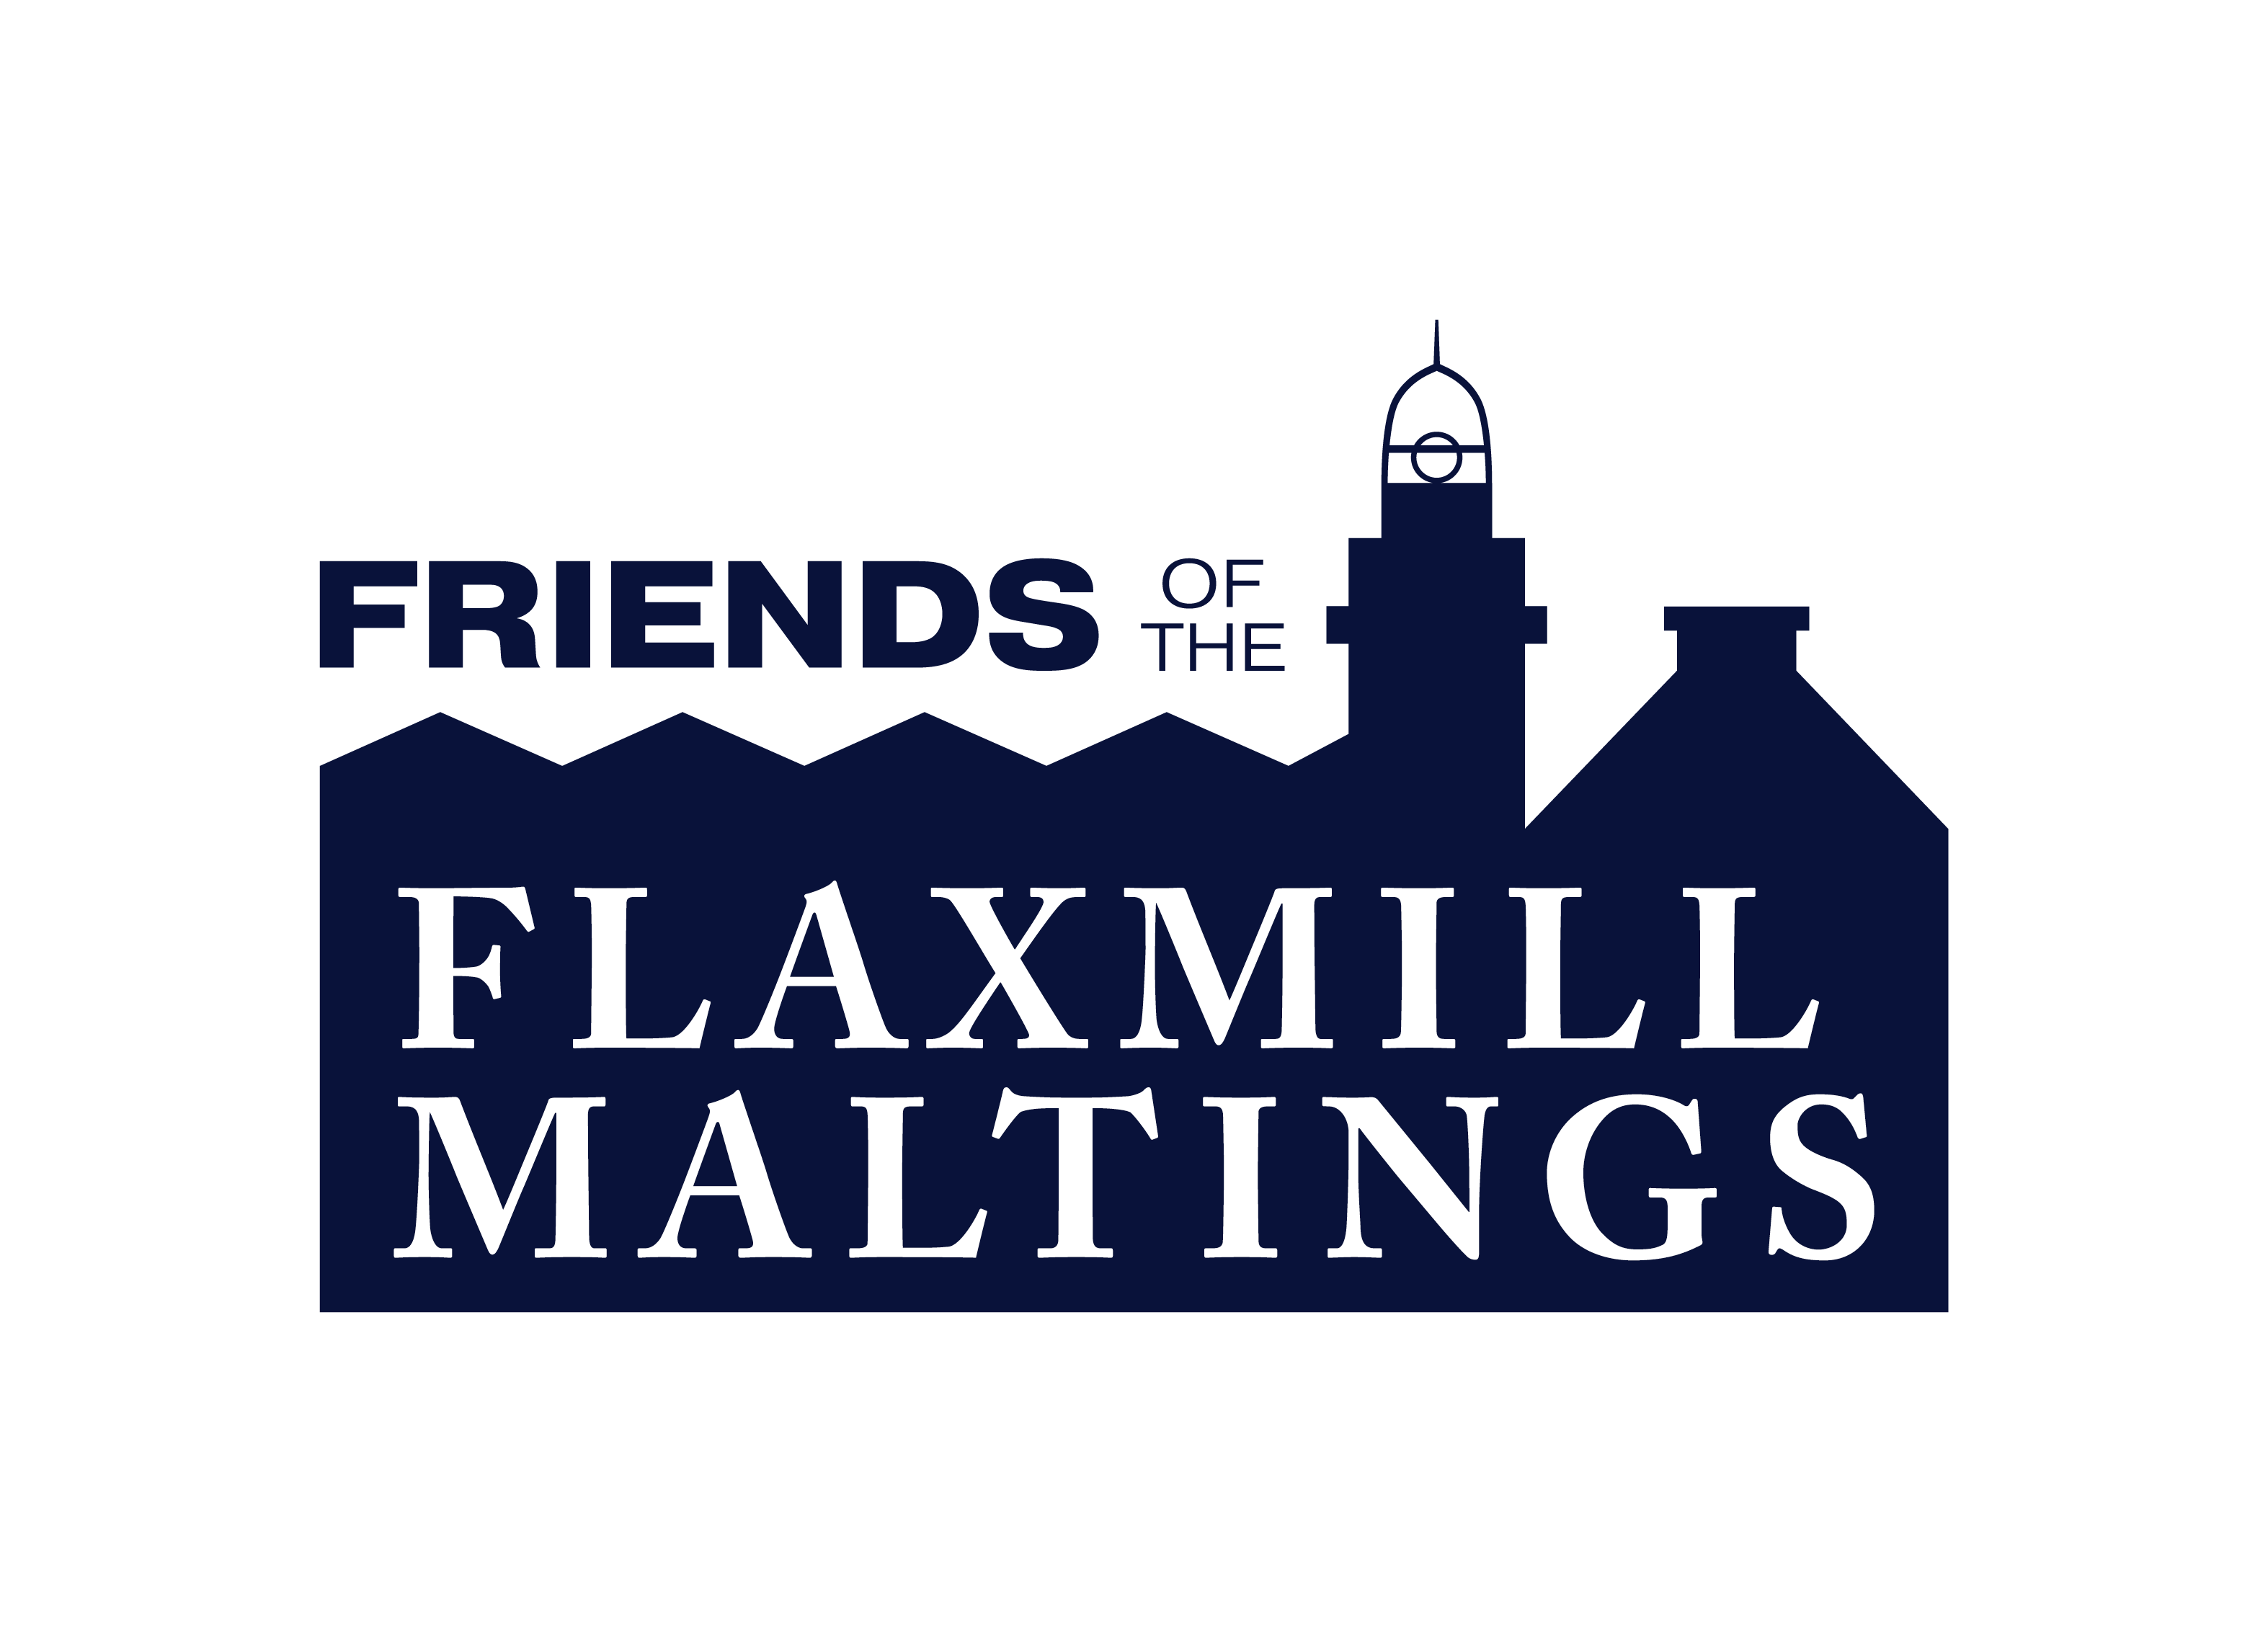 Friends of the Flaxmill Maltings